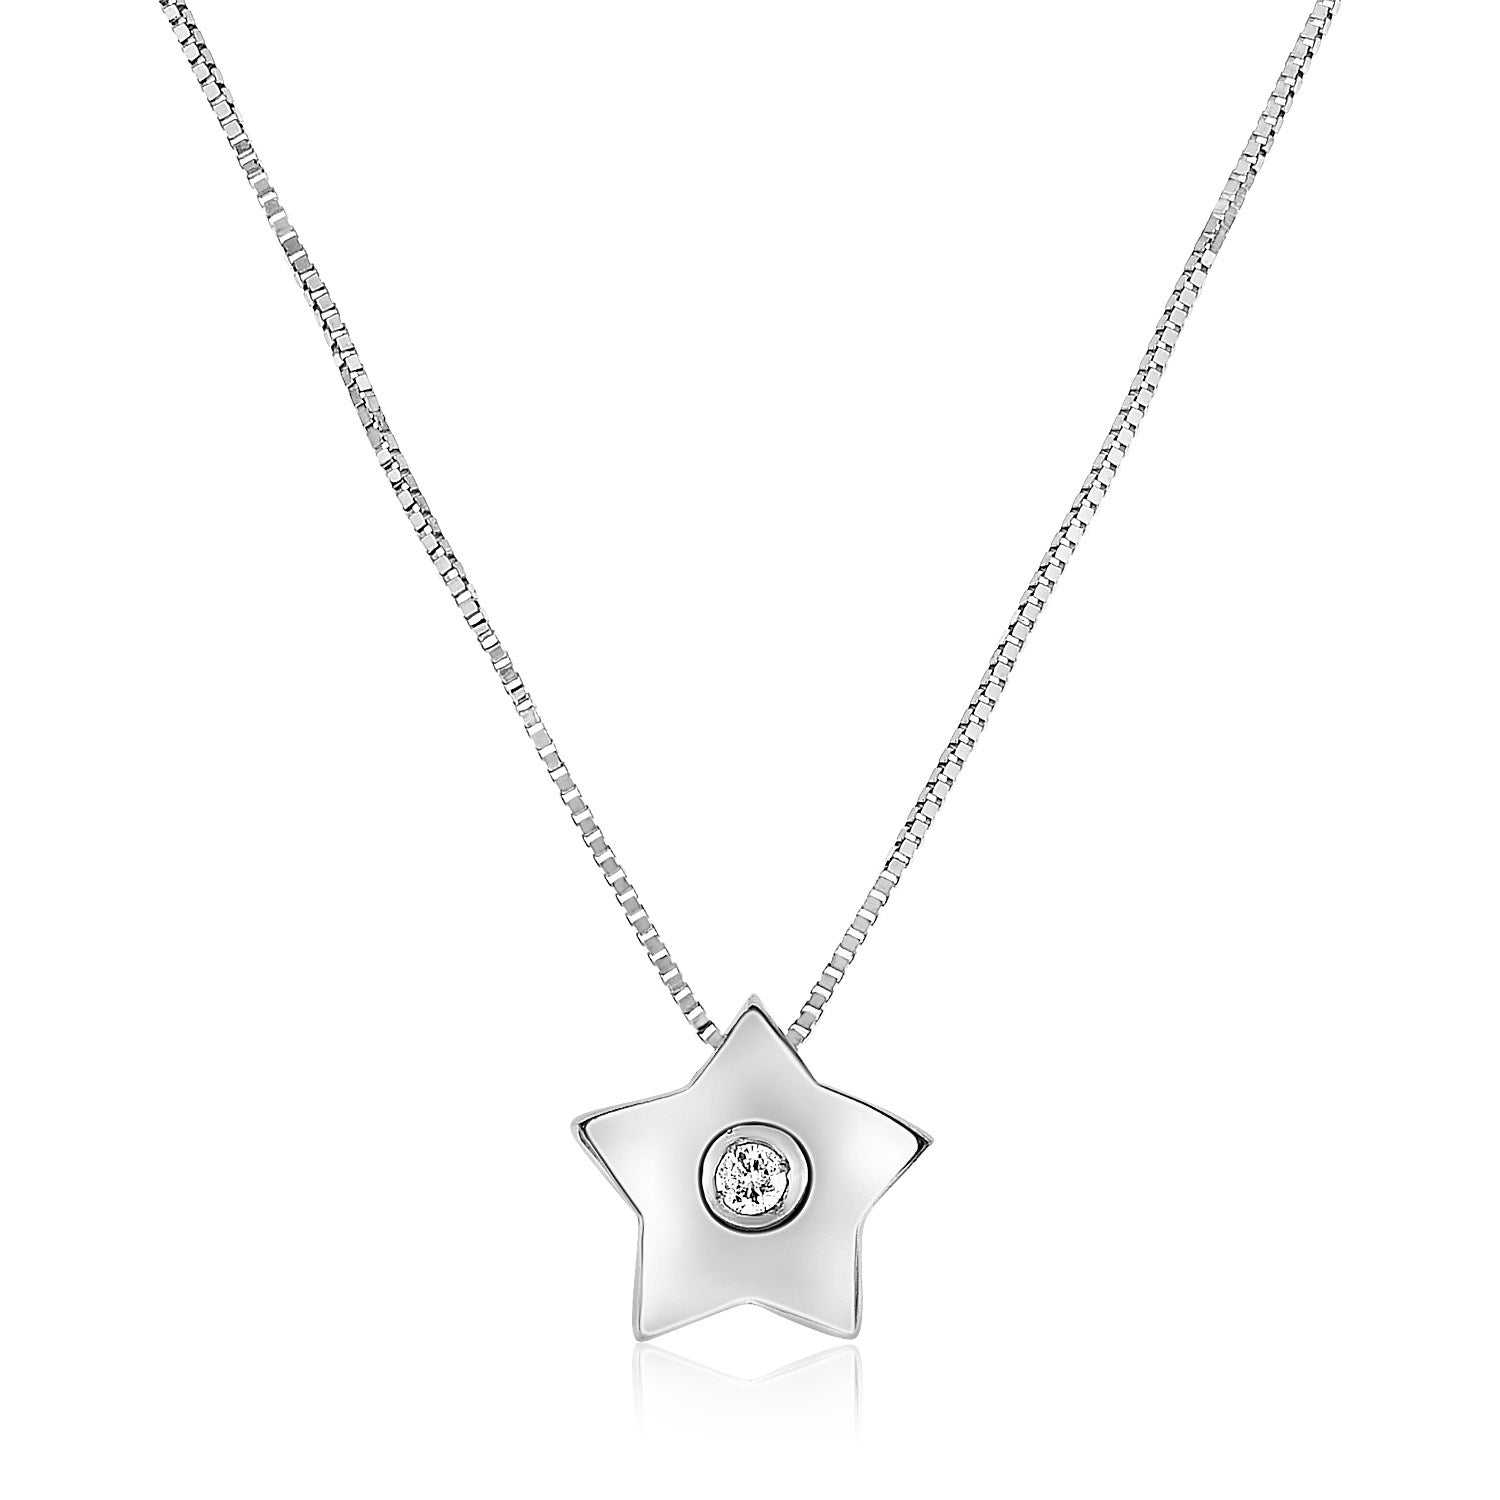 14k White Gold Necklace with Gold and Diamond Star Pendant